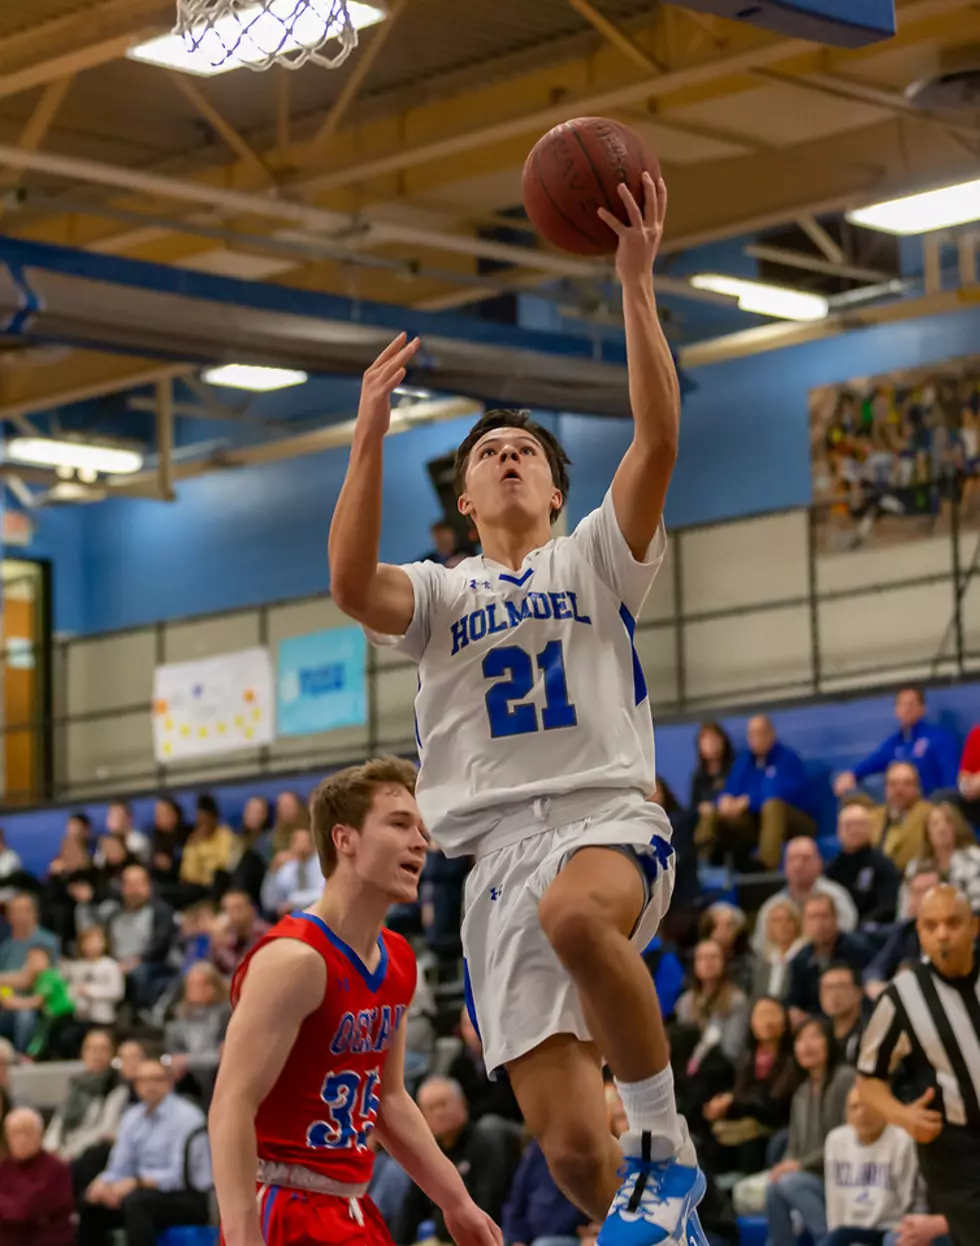 Squan More Time: Holmdel Edges Lincoln to Earn Manasquan Rematch